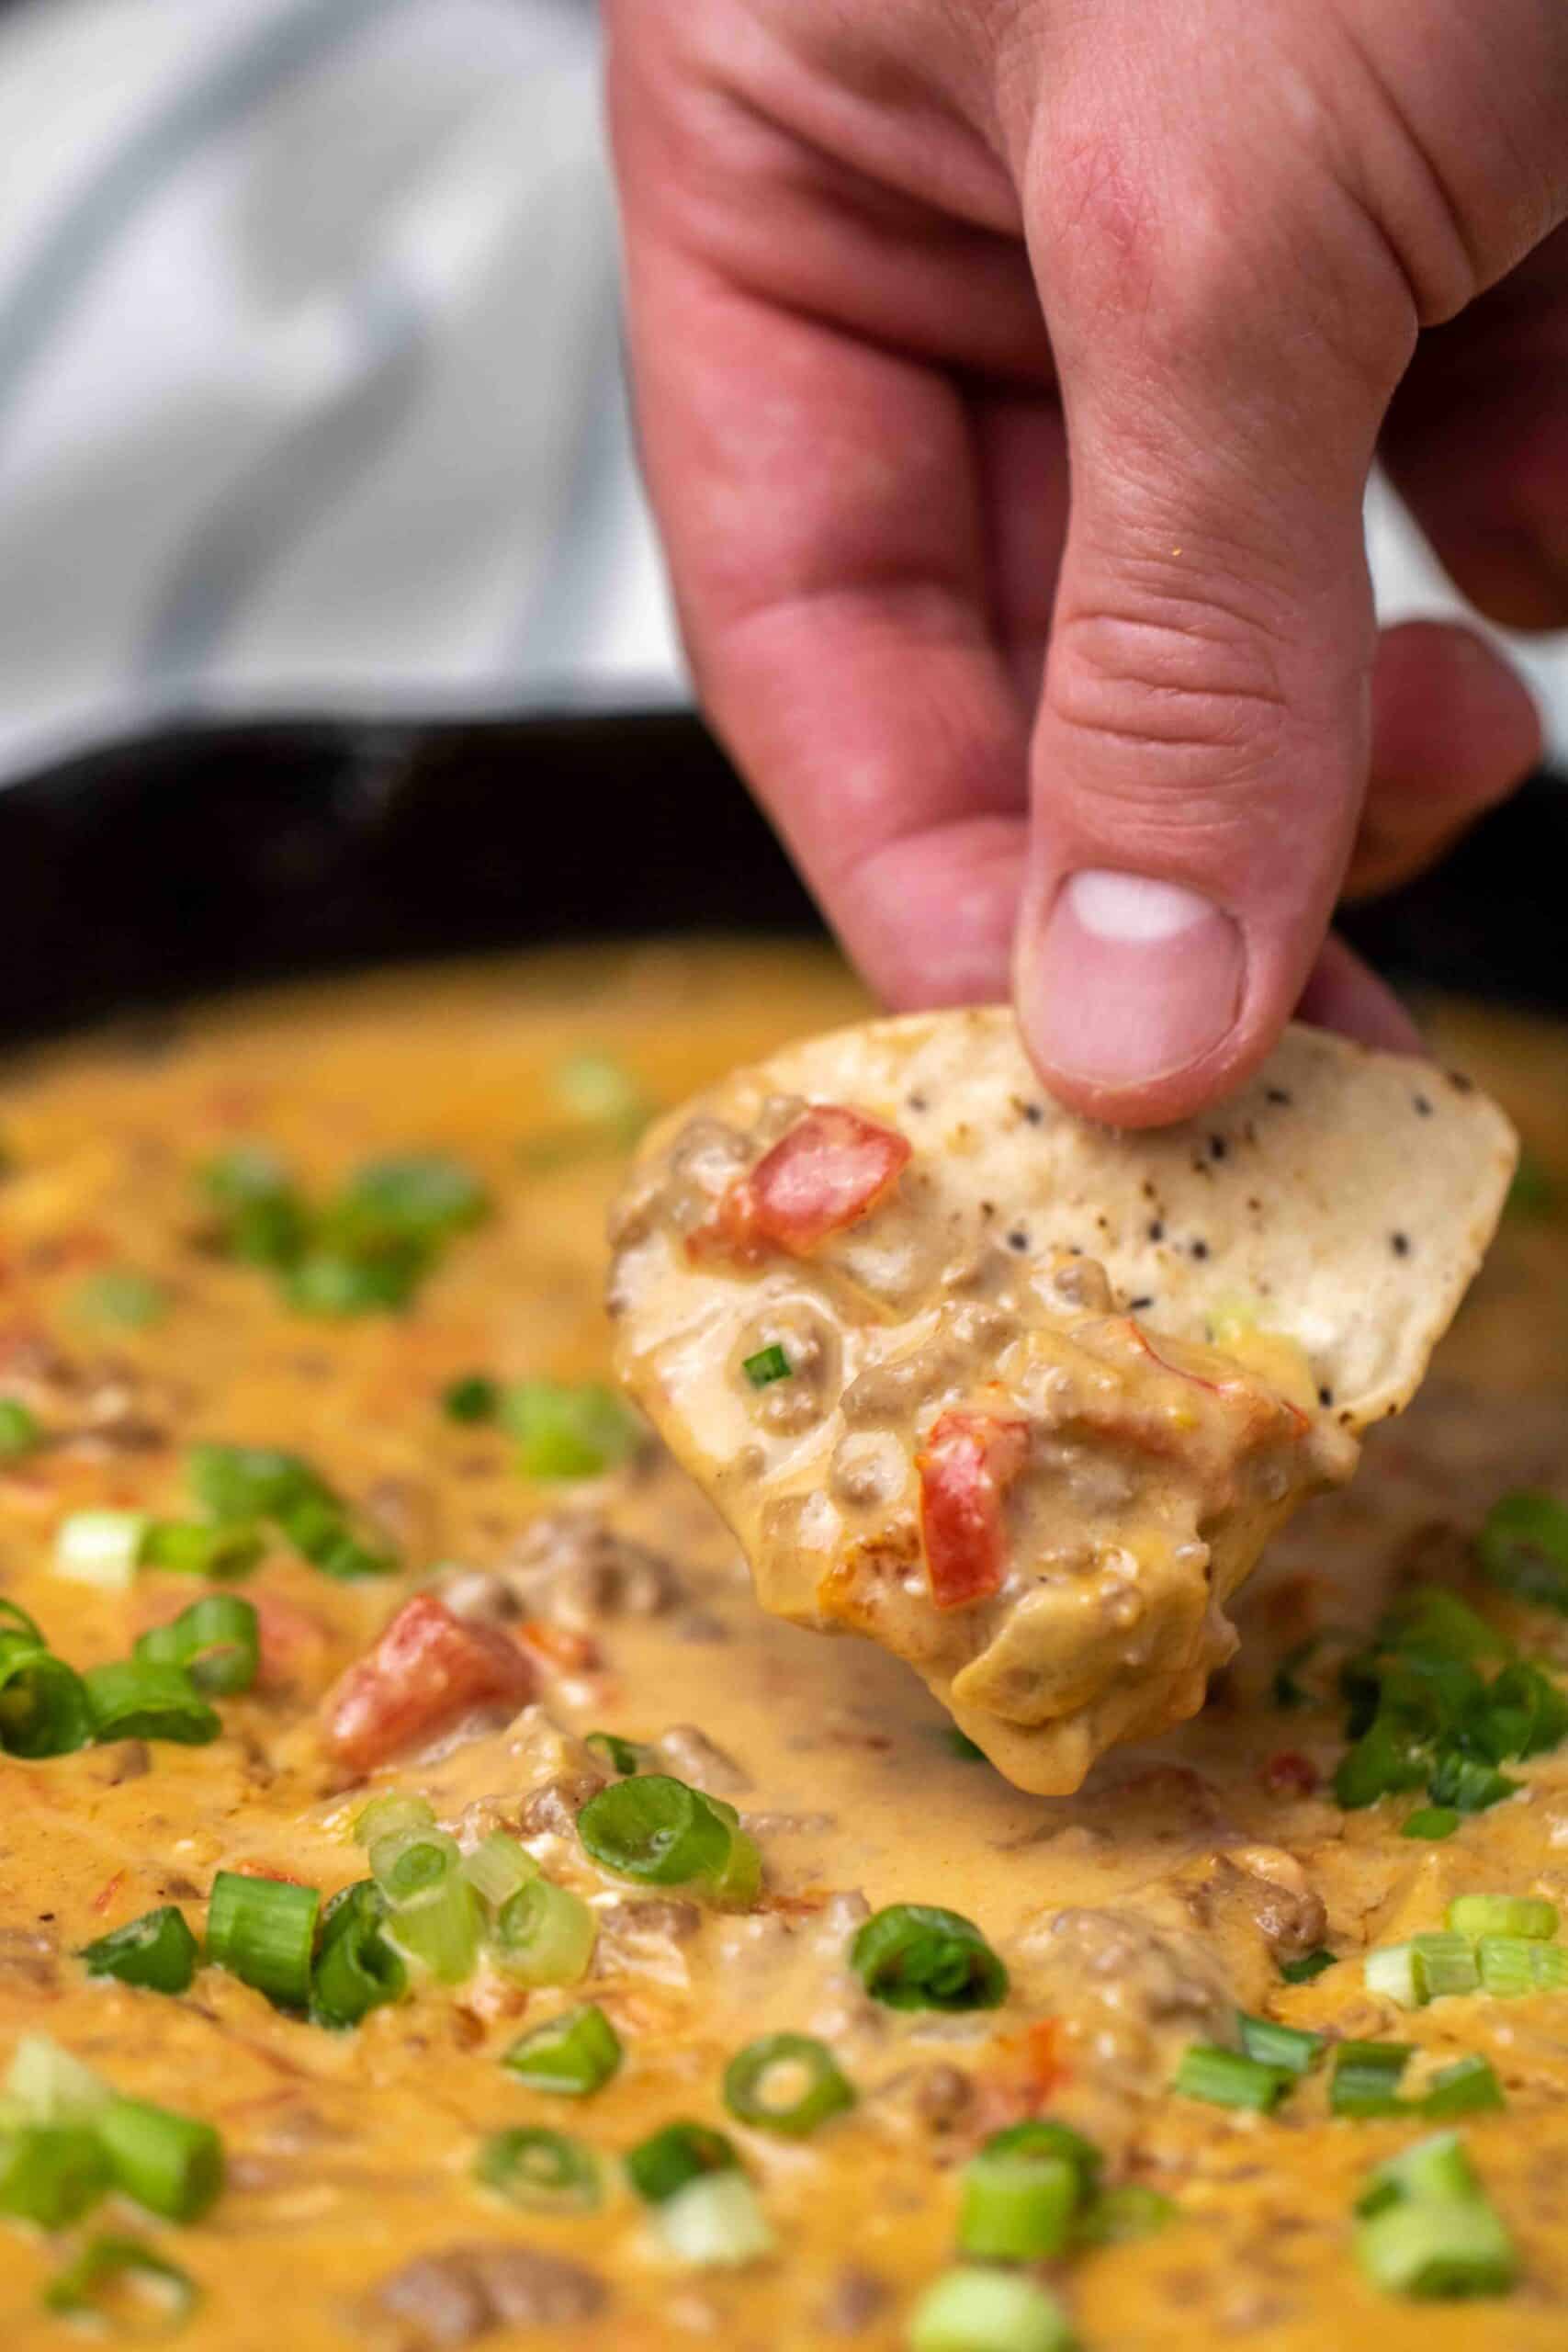 https://lifestyleofafoodie.com/wp-content/uploads/2020/11/Cheese-Rotel-Dip-18-of-22-scaled.jpg